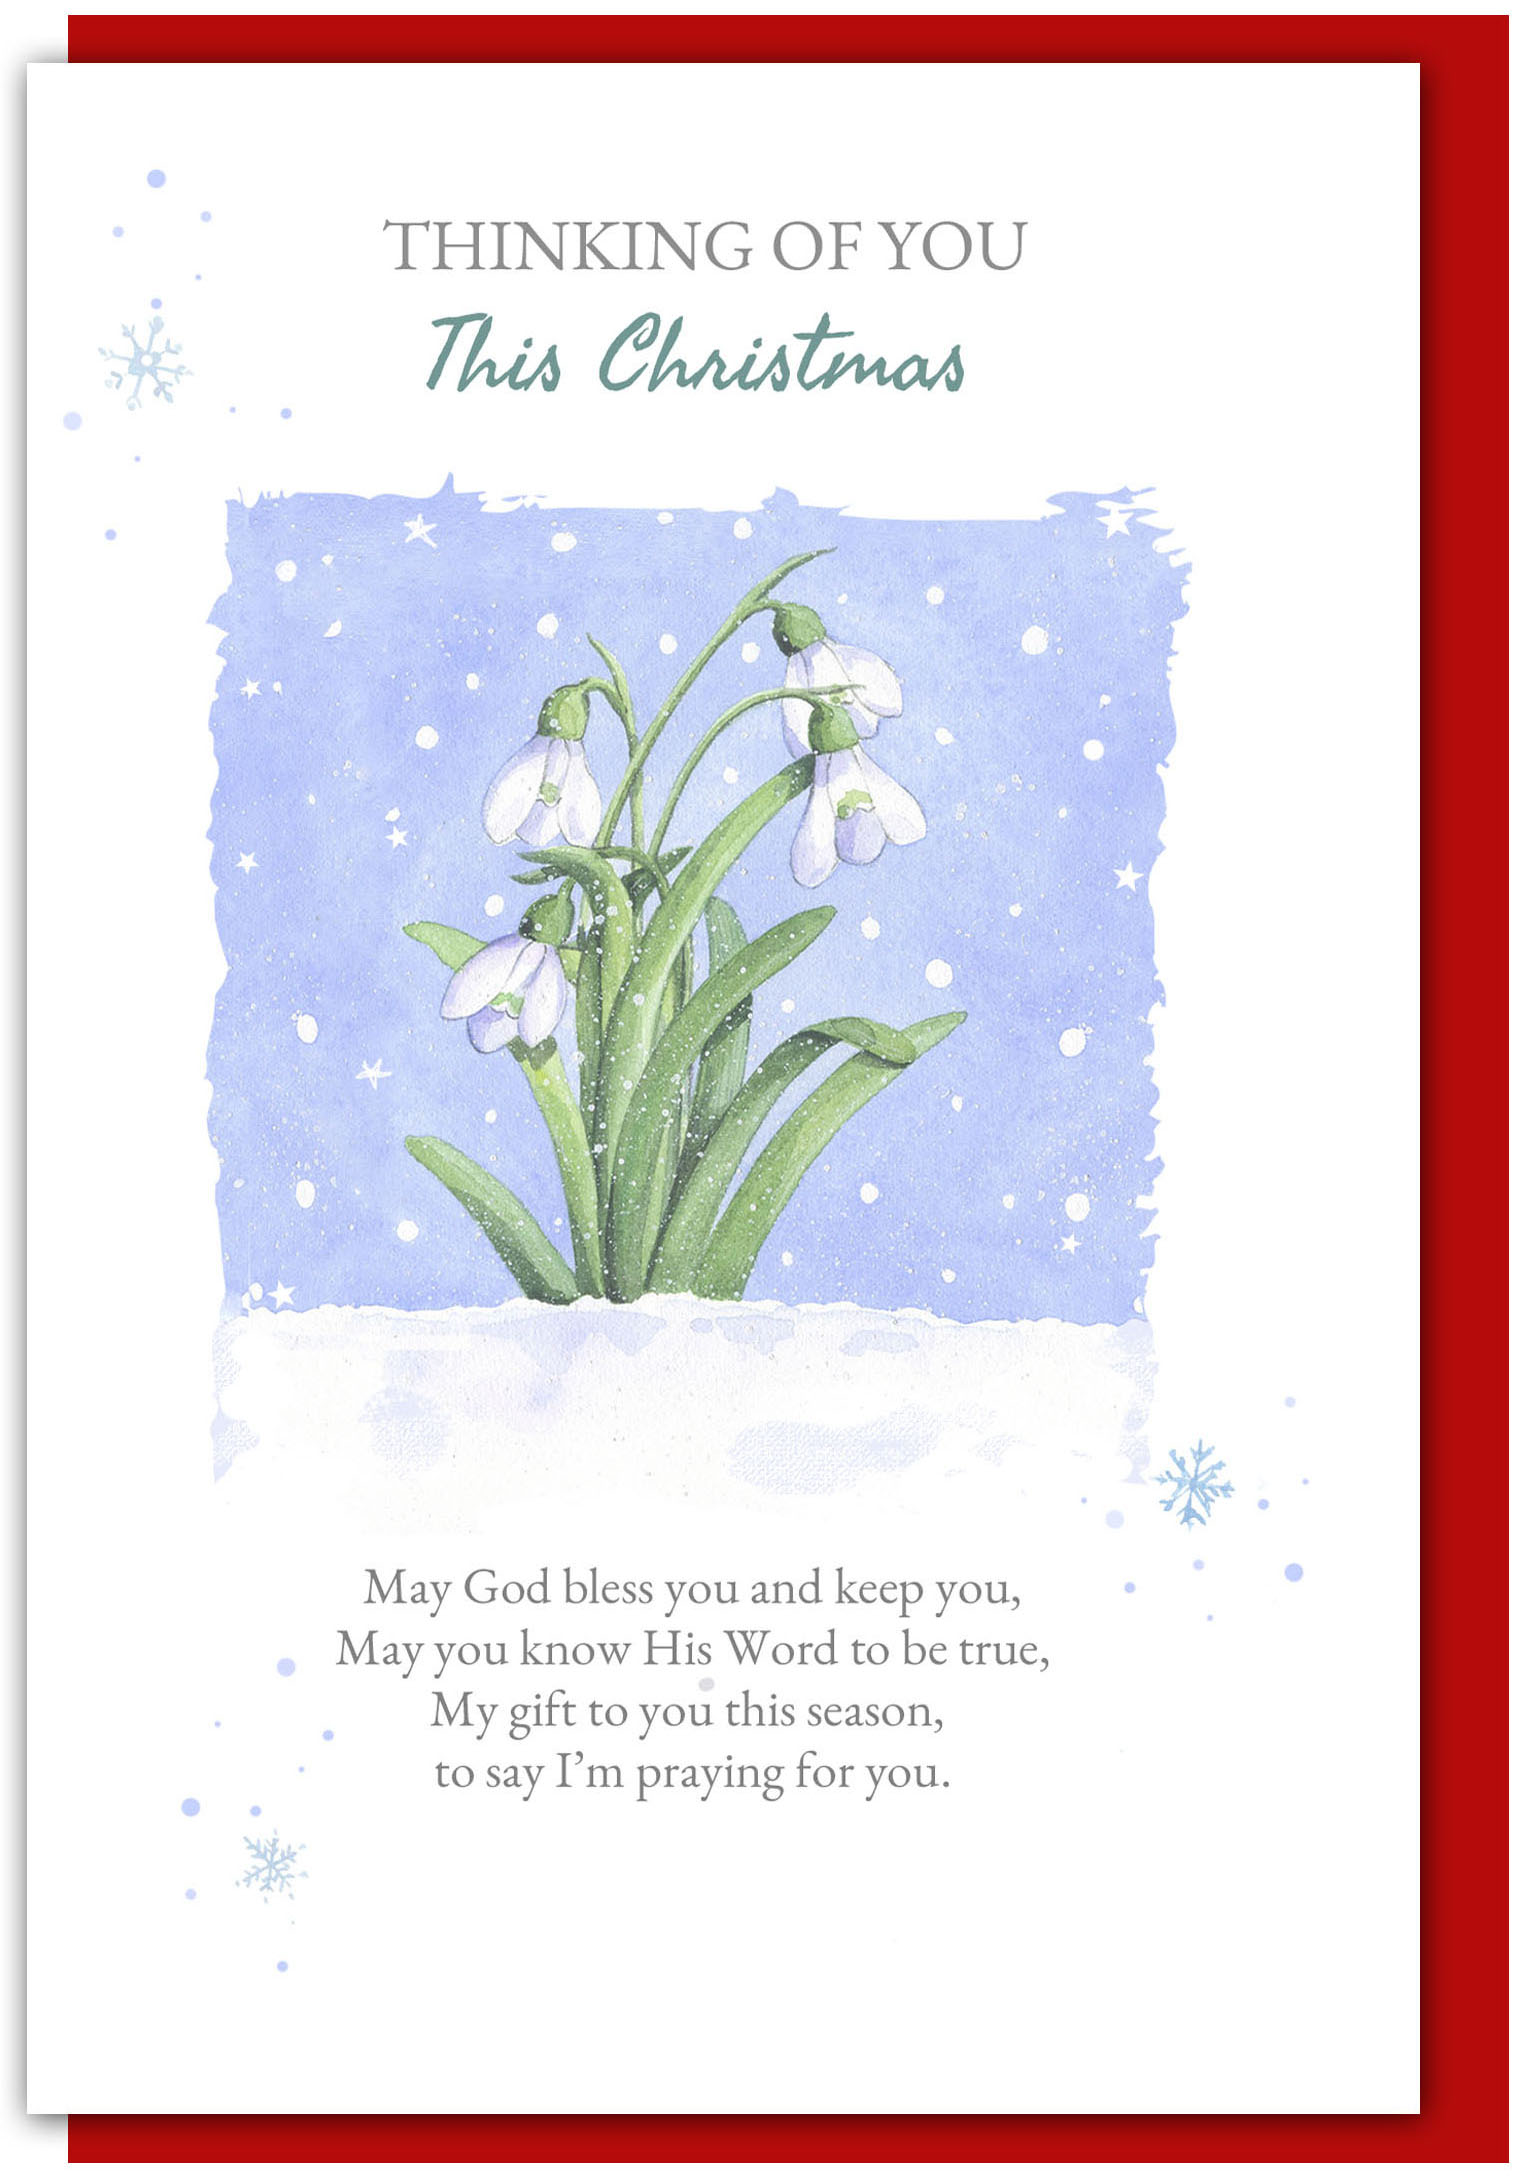 Thinking of You Snowdrops Christmas Card  Free Delivery when you spend